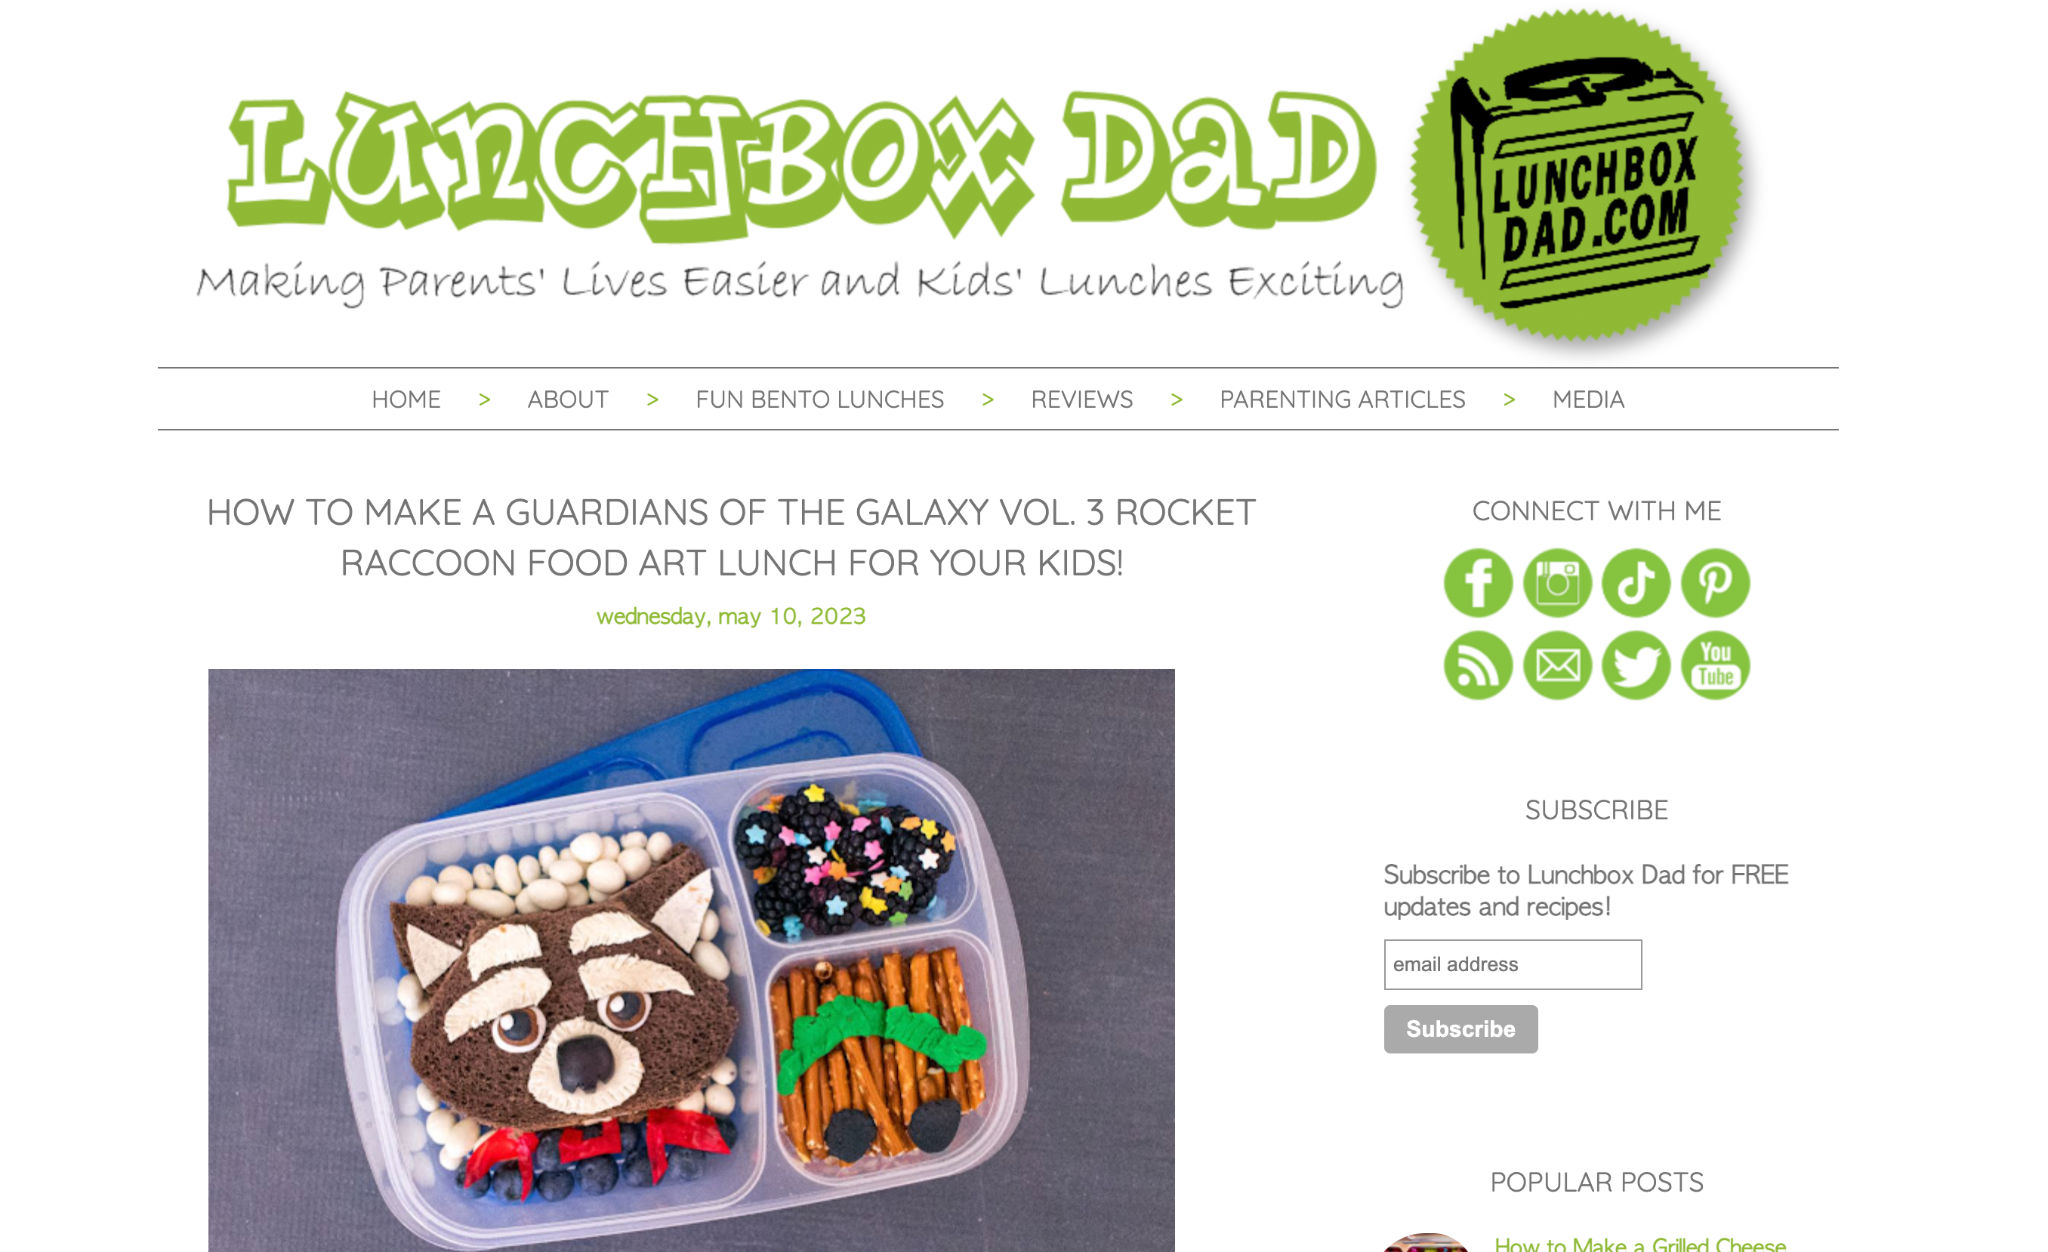 lunchbox dad is one of the best dad blogs